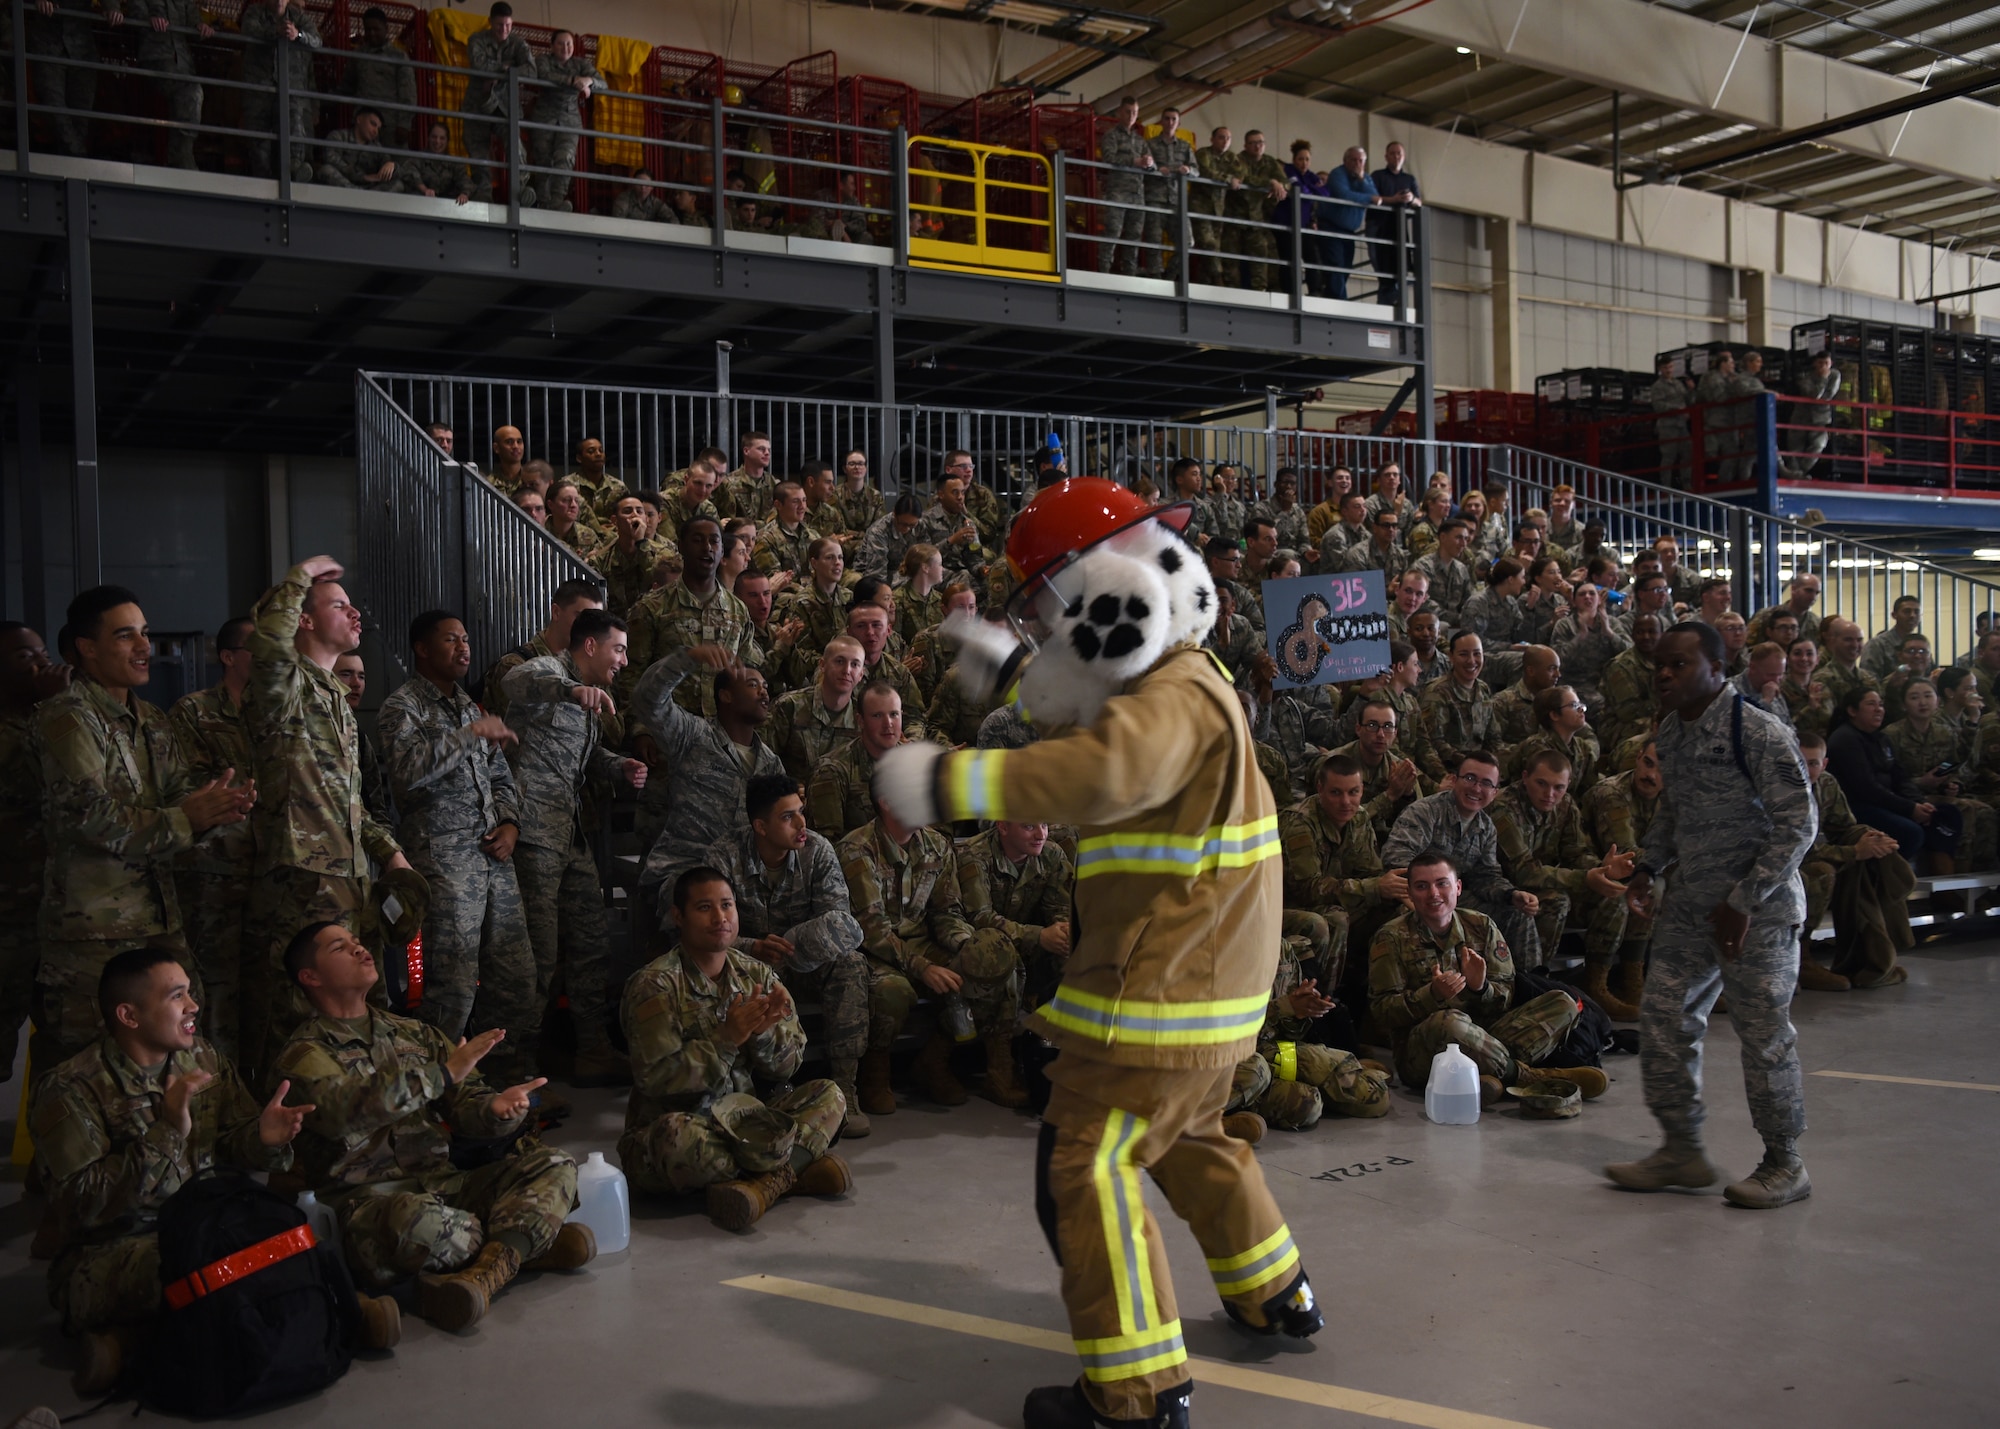 Sparky, National Fire Protection Association mascot, and U.S. Air Force Tech. Sgt. Derwin Finley, 312th Training Squadron military training leader, work together to amp up the attendees before the 17th Training Group Drill Competition inside the Louis F. Garland Department of Defense Fire Academy High Bay on Goodfellow Air Force Base, Texas, Feb. 7, 2020. Many agencies on base have mascots, which make appearances during special events to promote team unity and morale. (U.S. Air Force photo by Airman 1st Class Abbey Rieves)